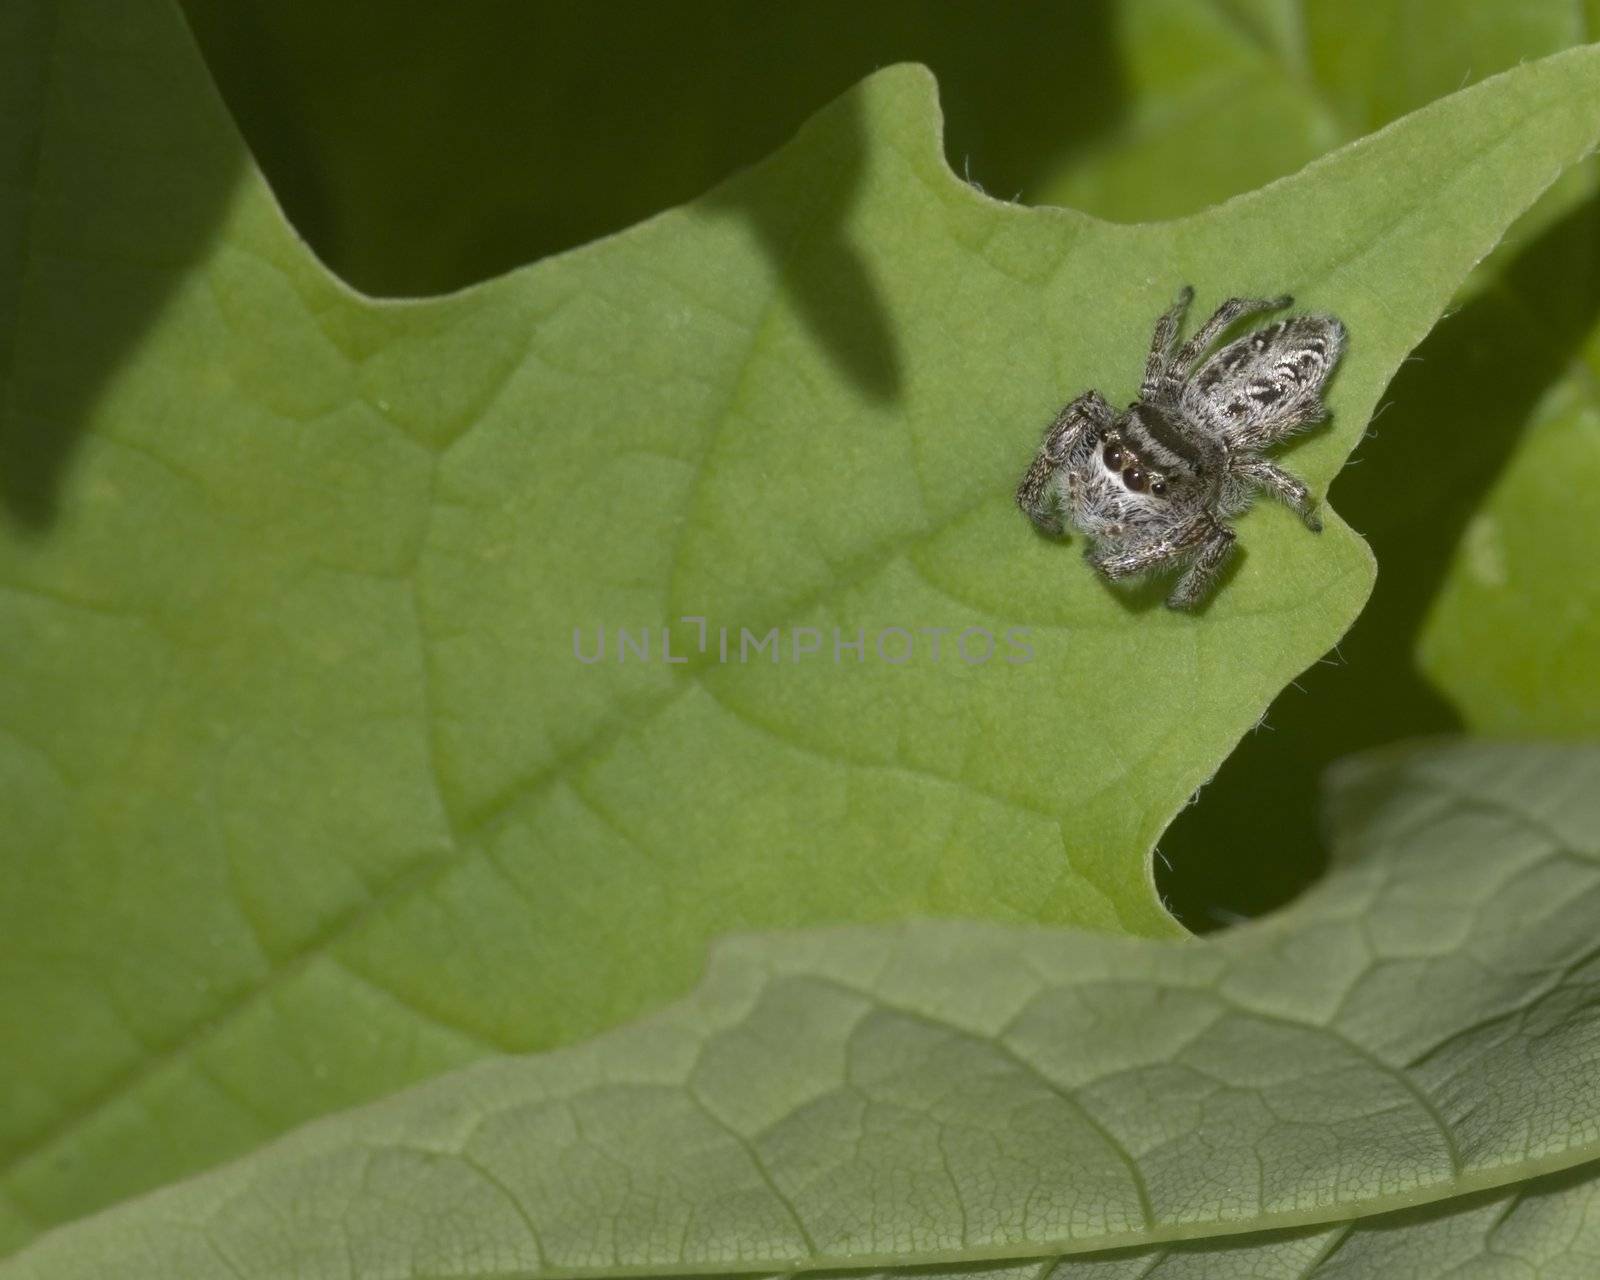 A jumping spider perched on a plant leaf.